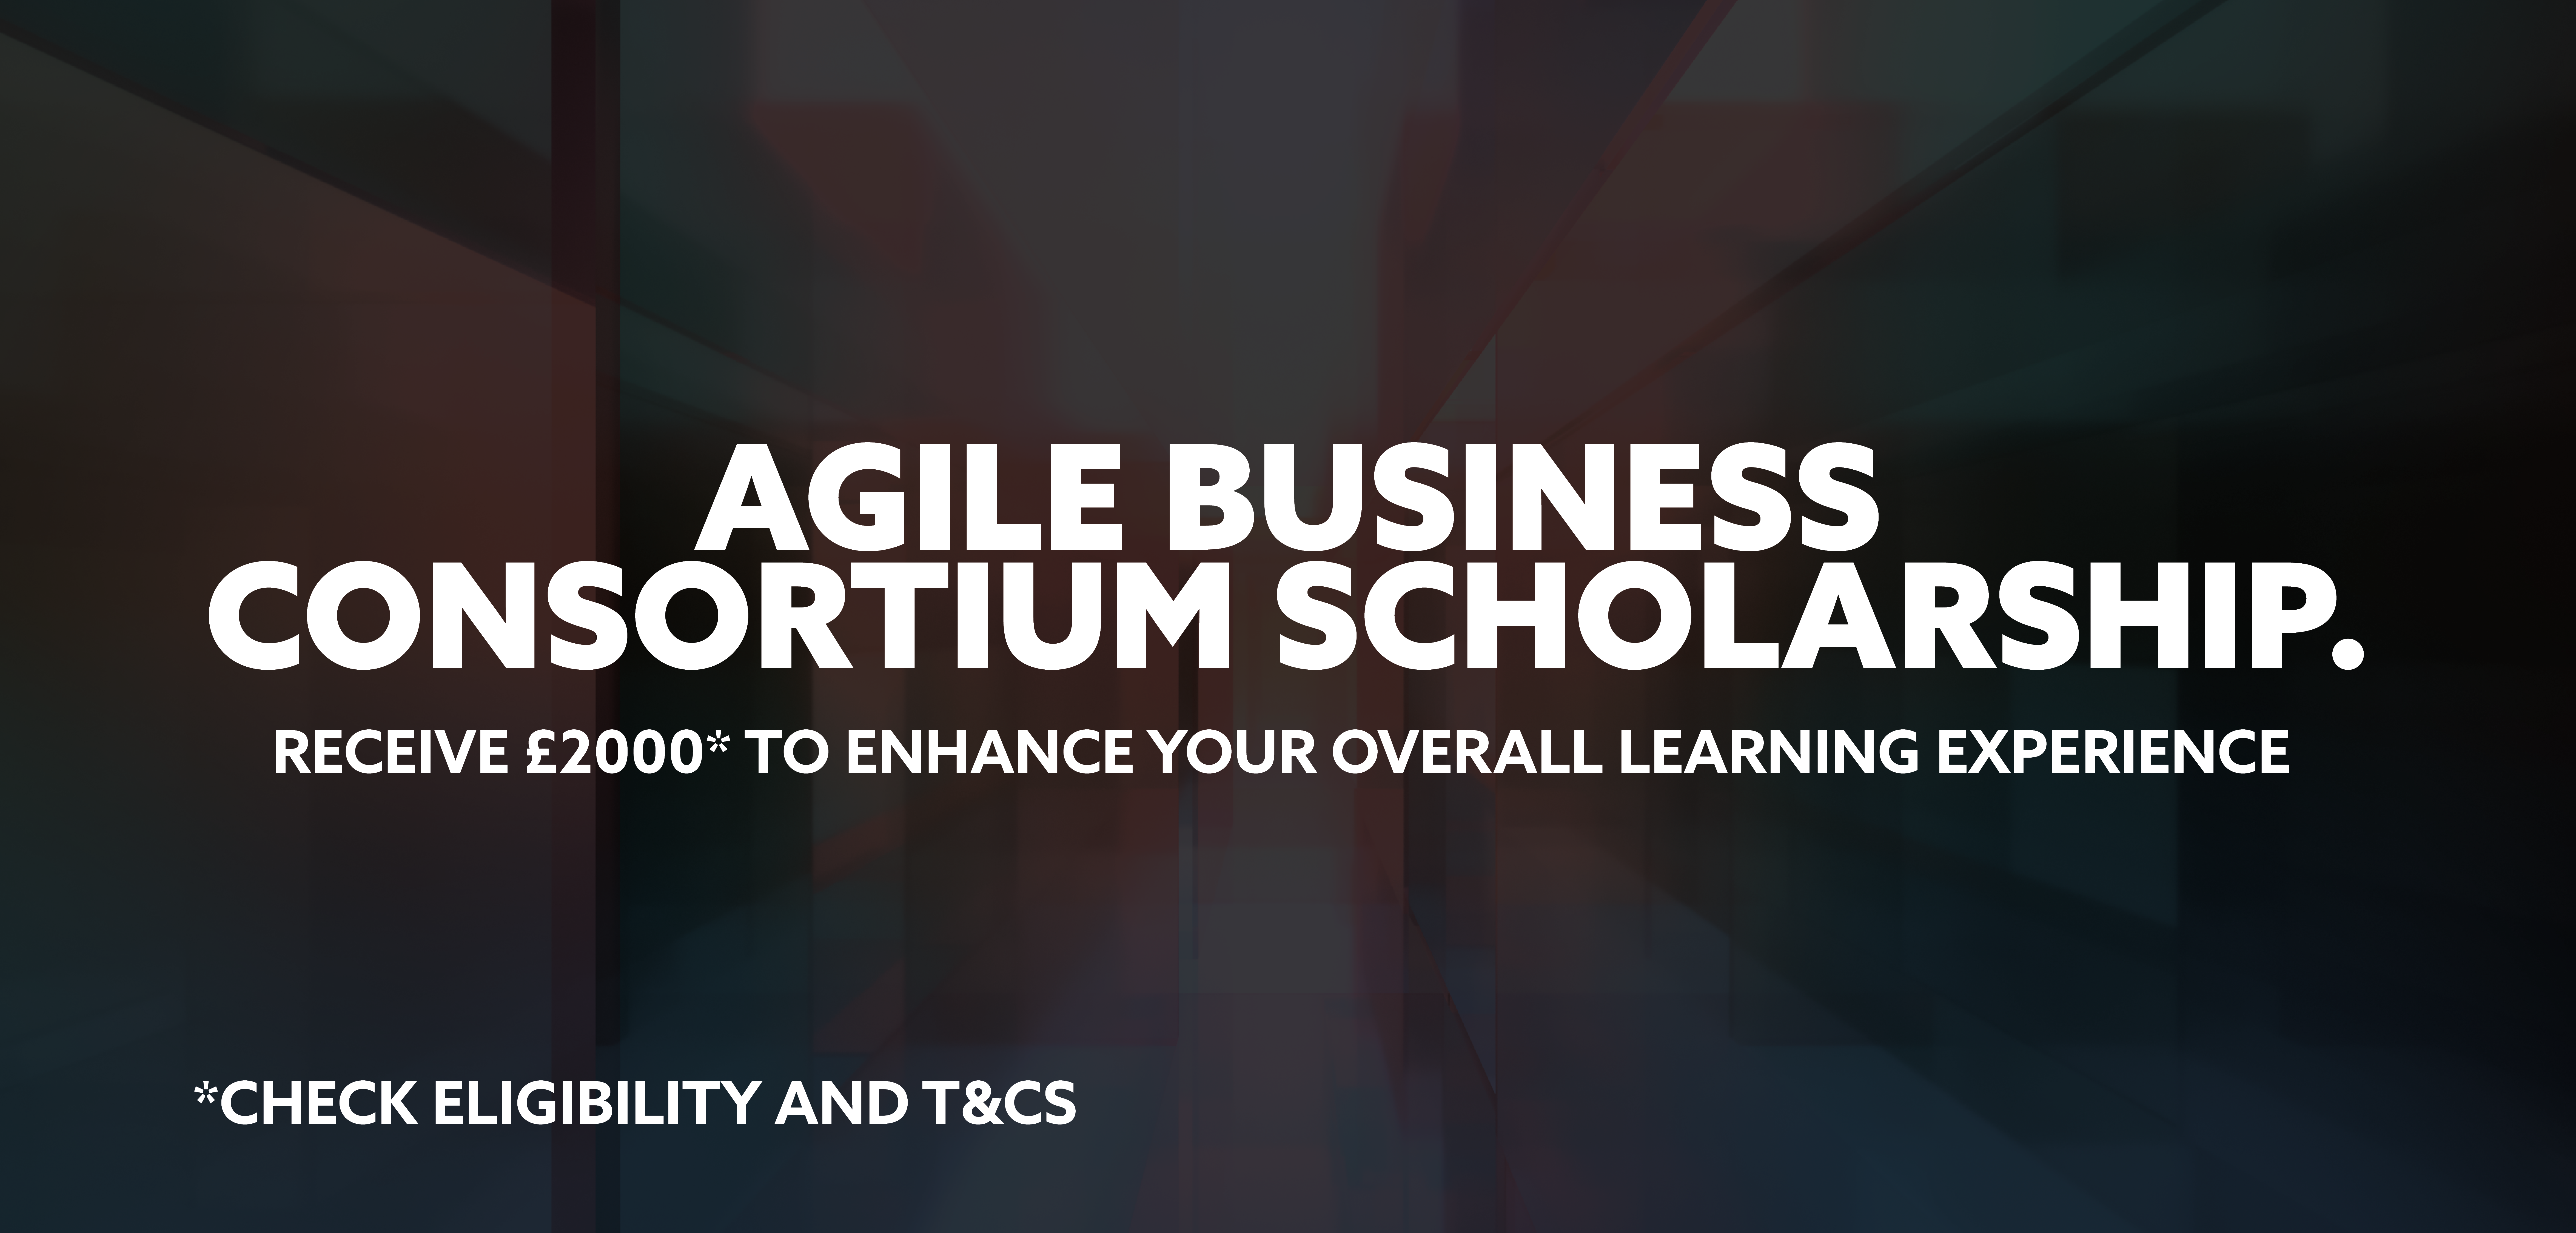 Agile Business Consortium Scholarship abstract image 